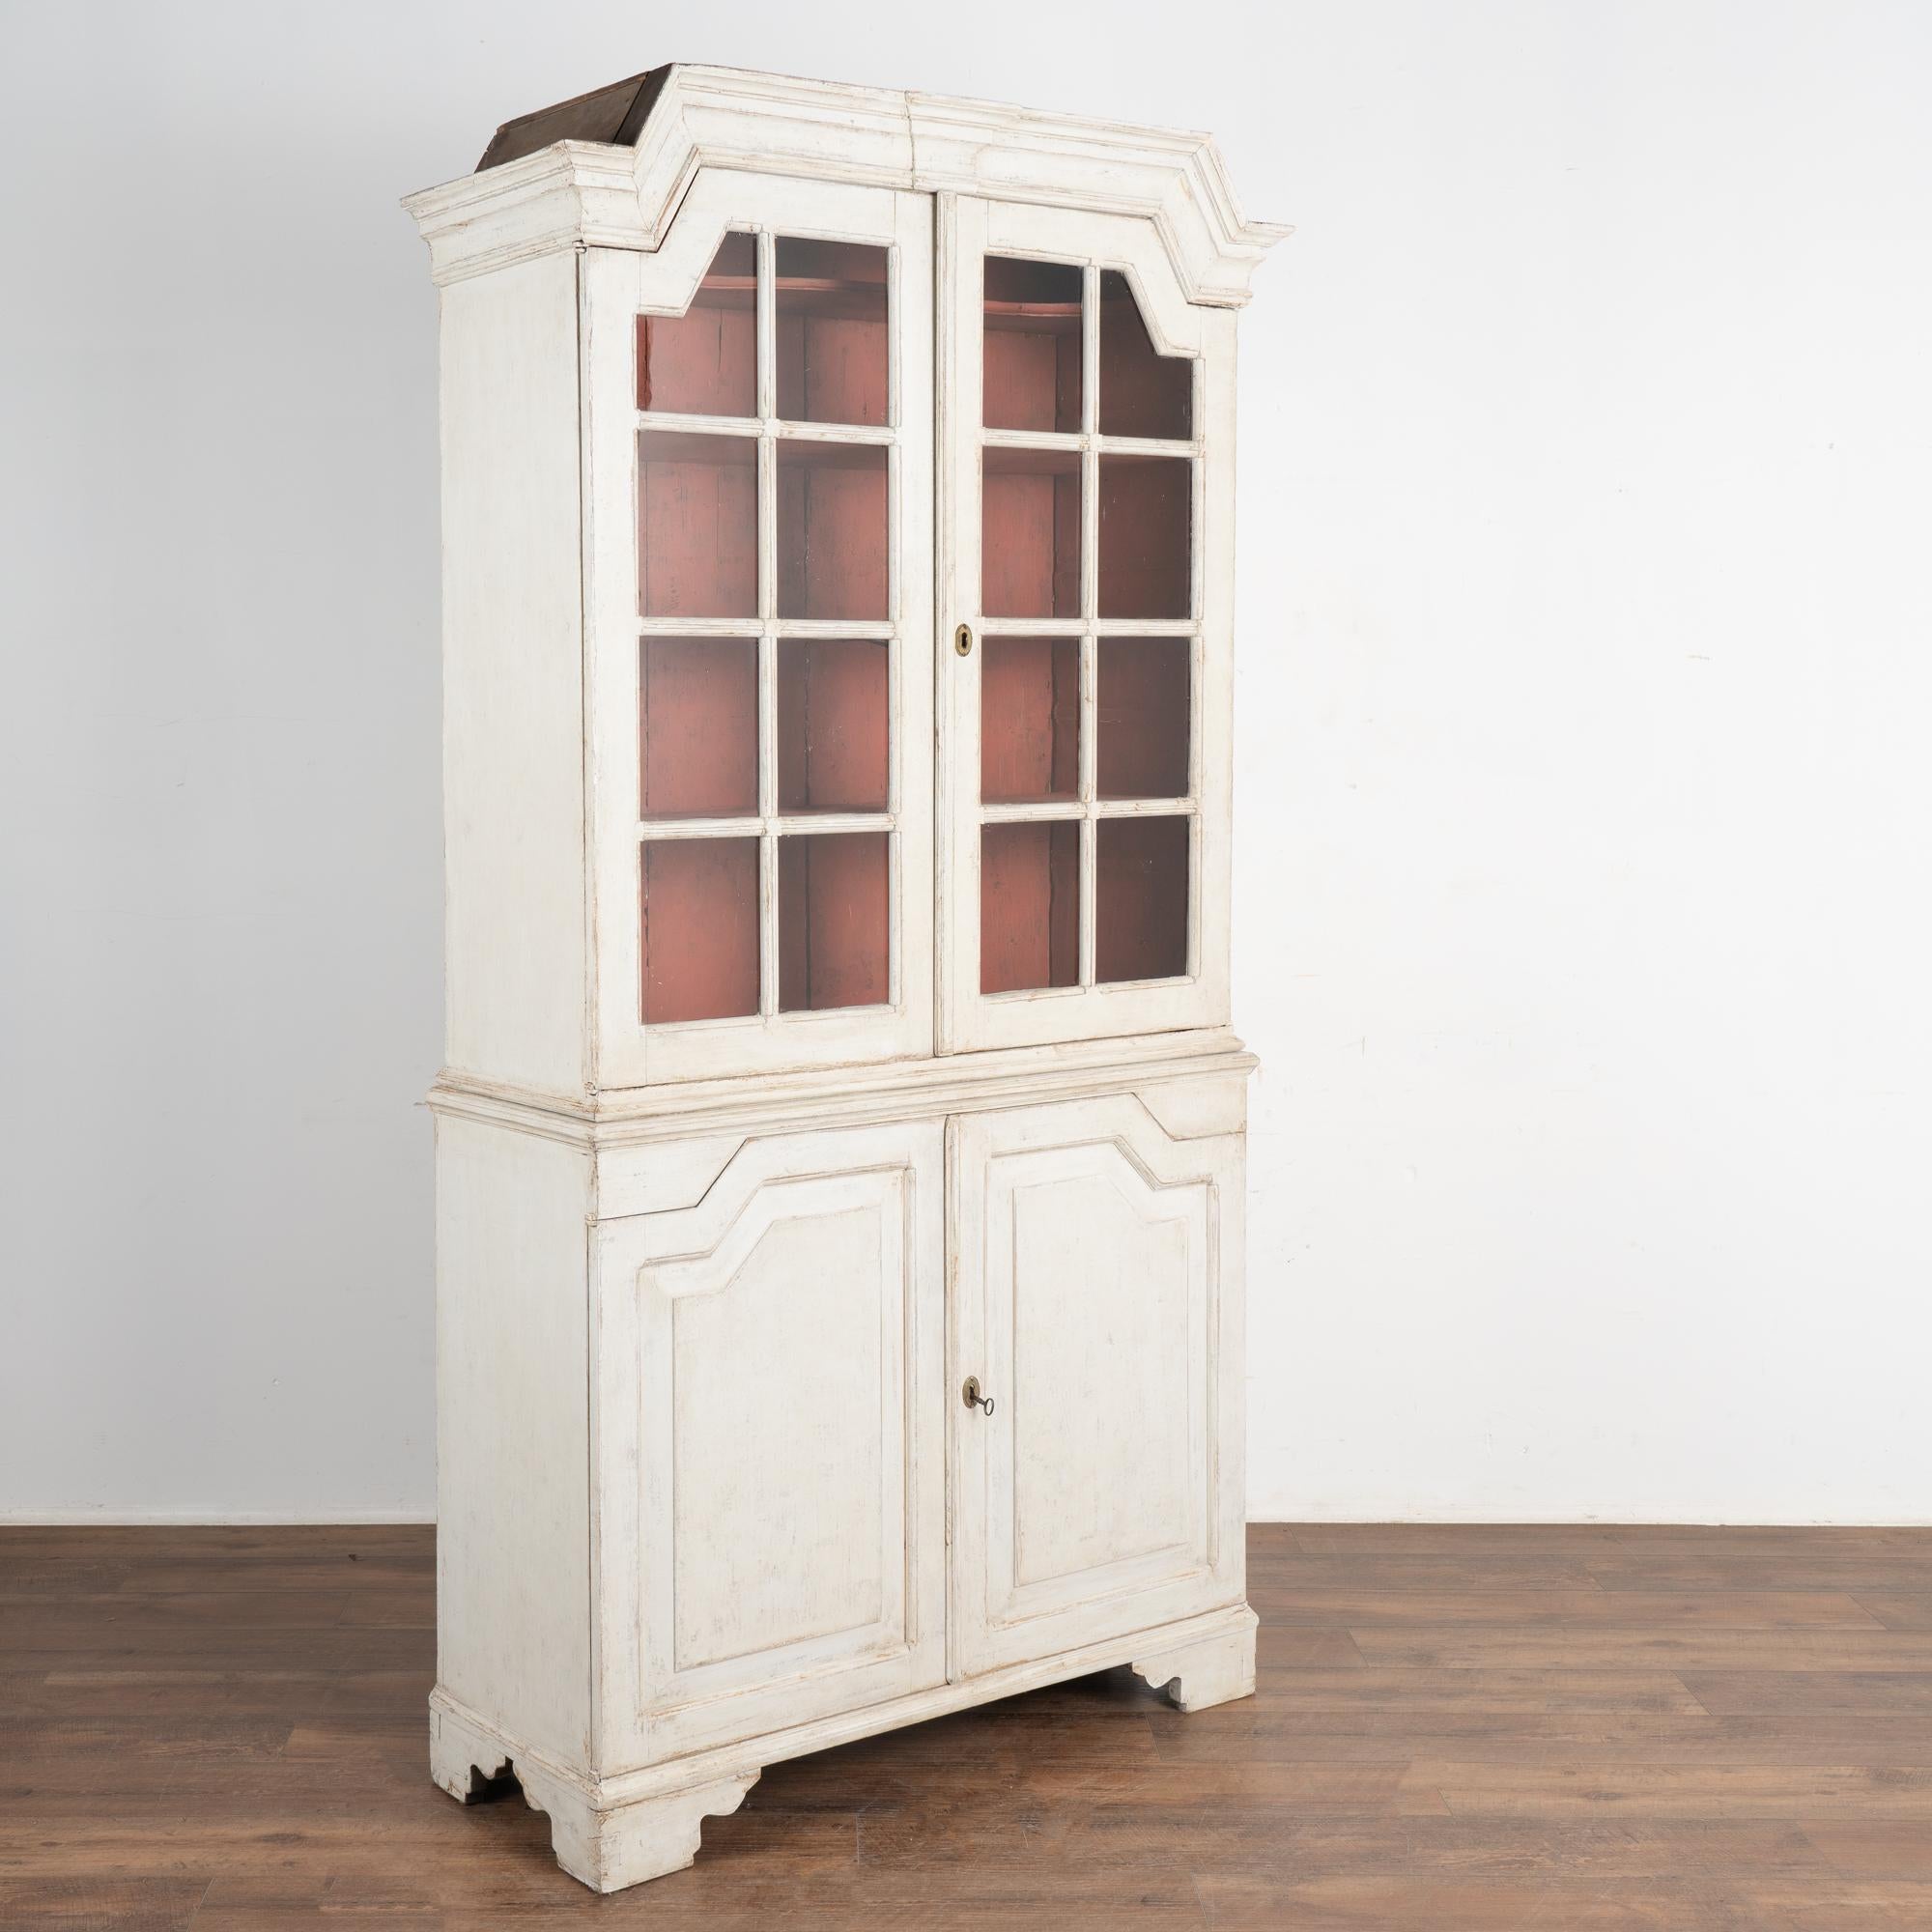 This European country pine cupboard may be used as a display cabinet or bookcase. The upper pane glass doors allow for ideal display of any collection held within.
The newer professionally applied white painted finish is complimented by the